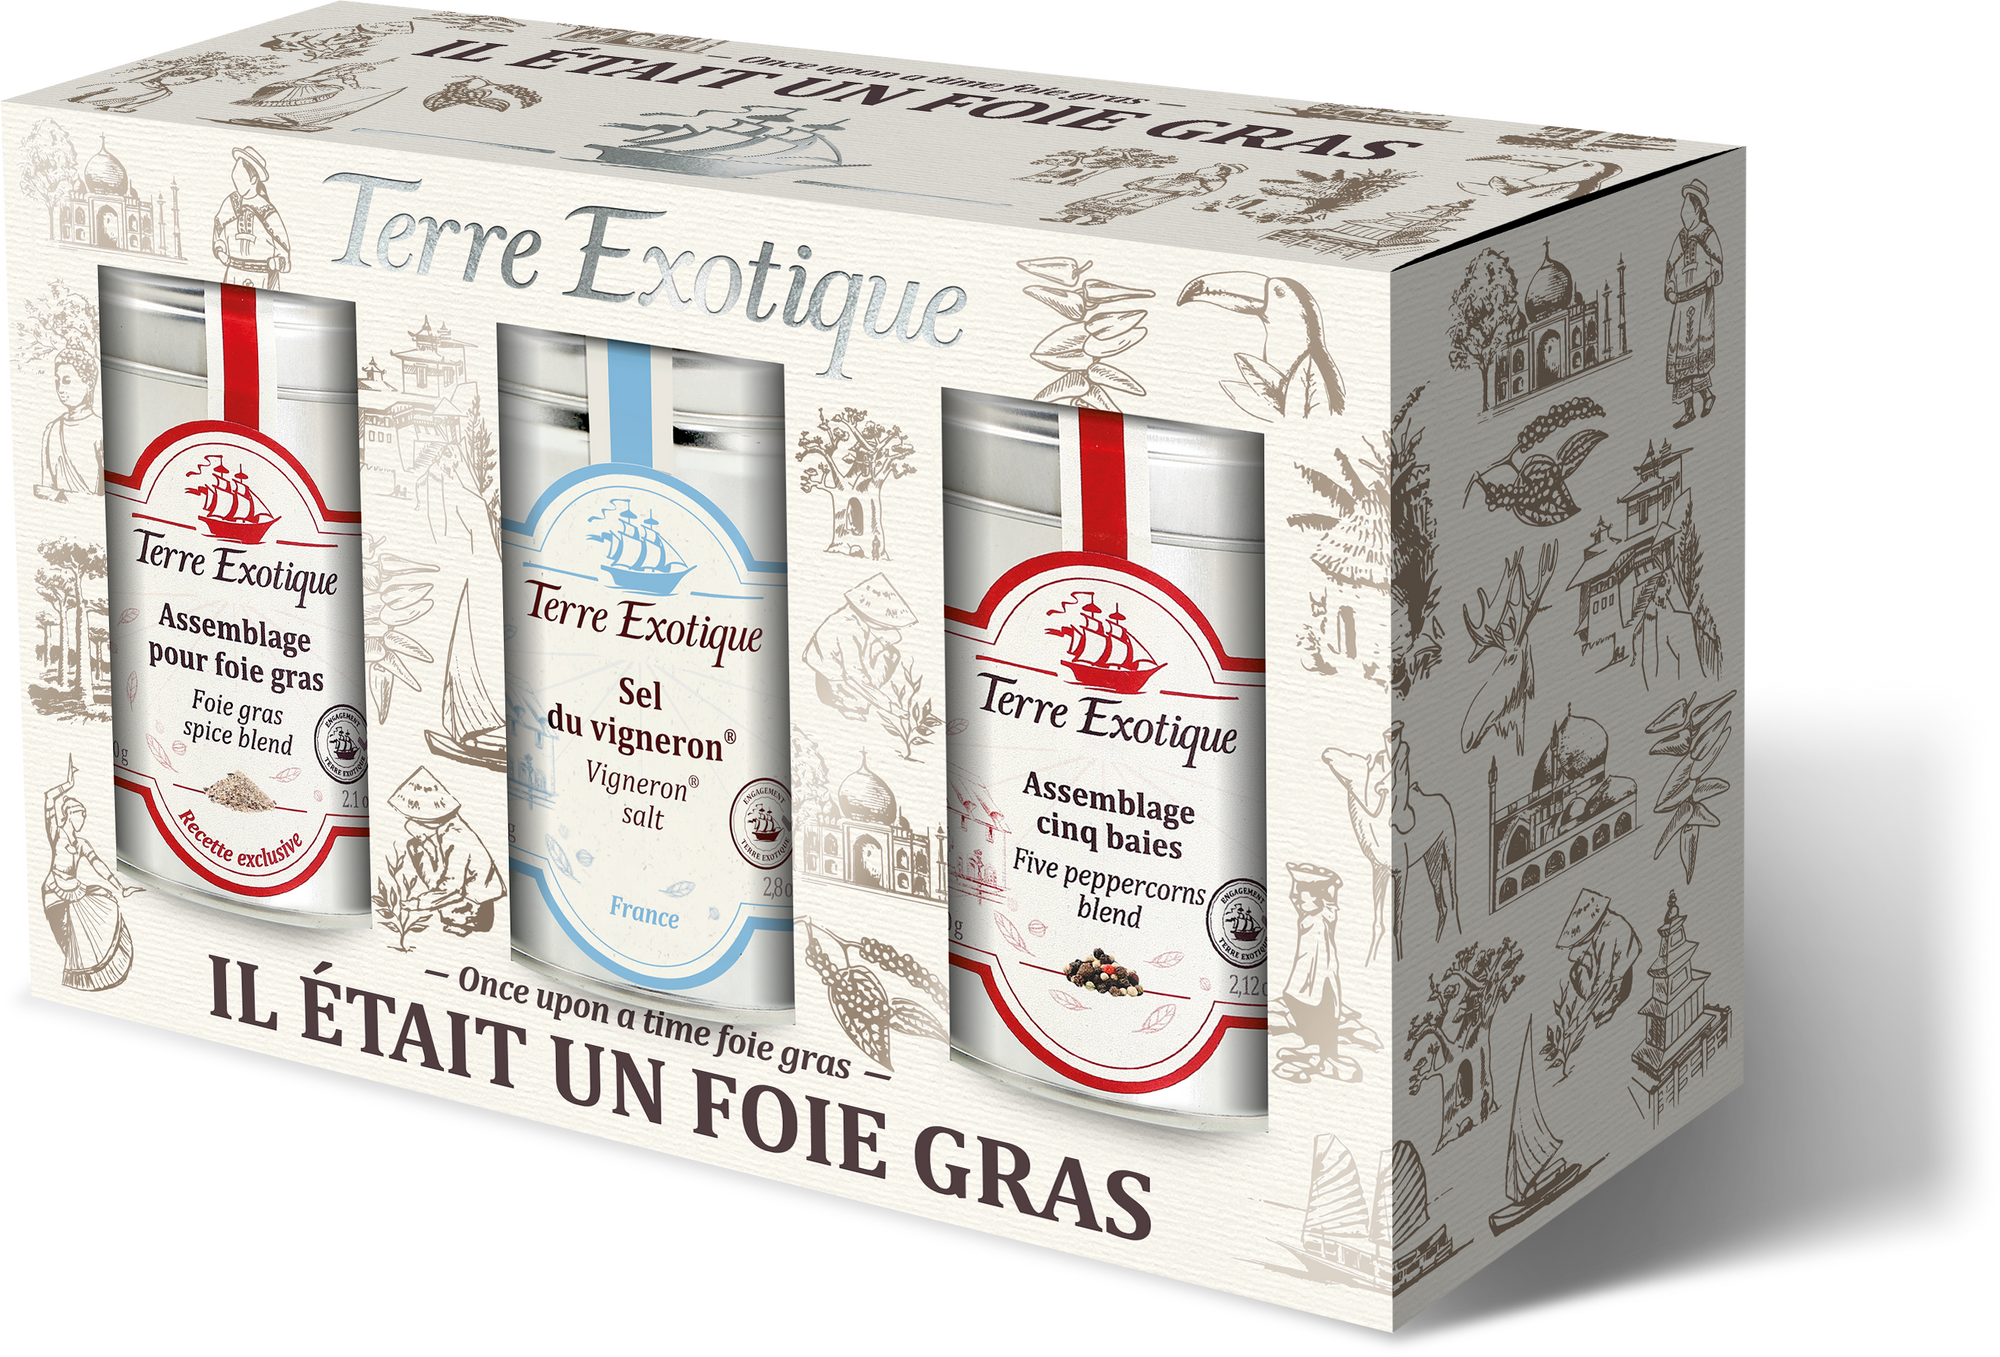 Terre Exotique 'Once Upon a Time Foie Gras' Gift Box